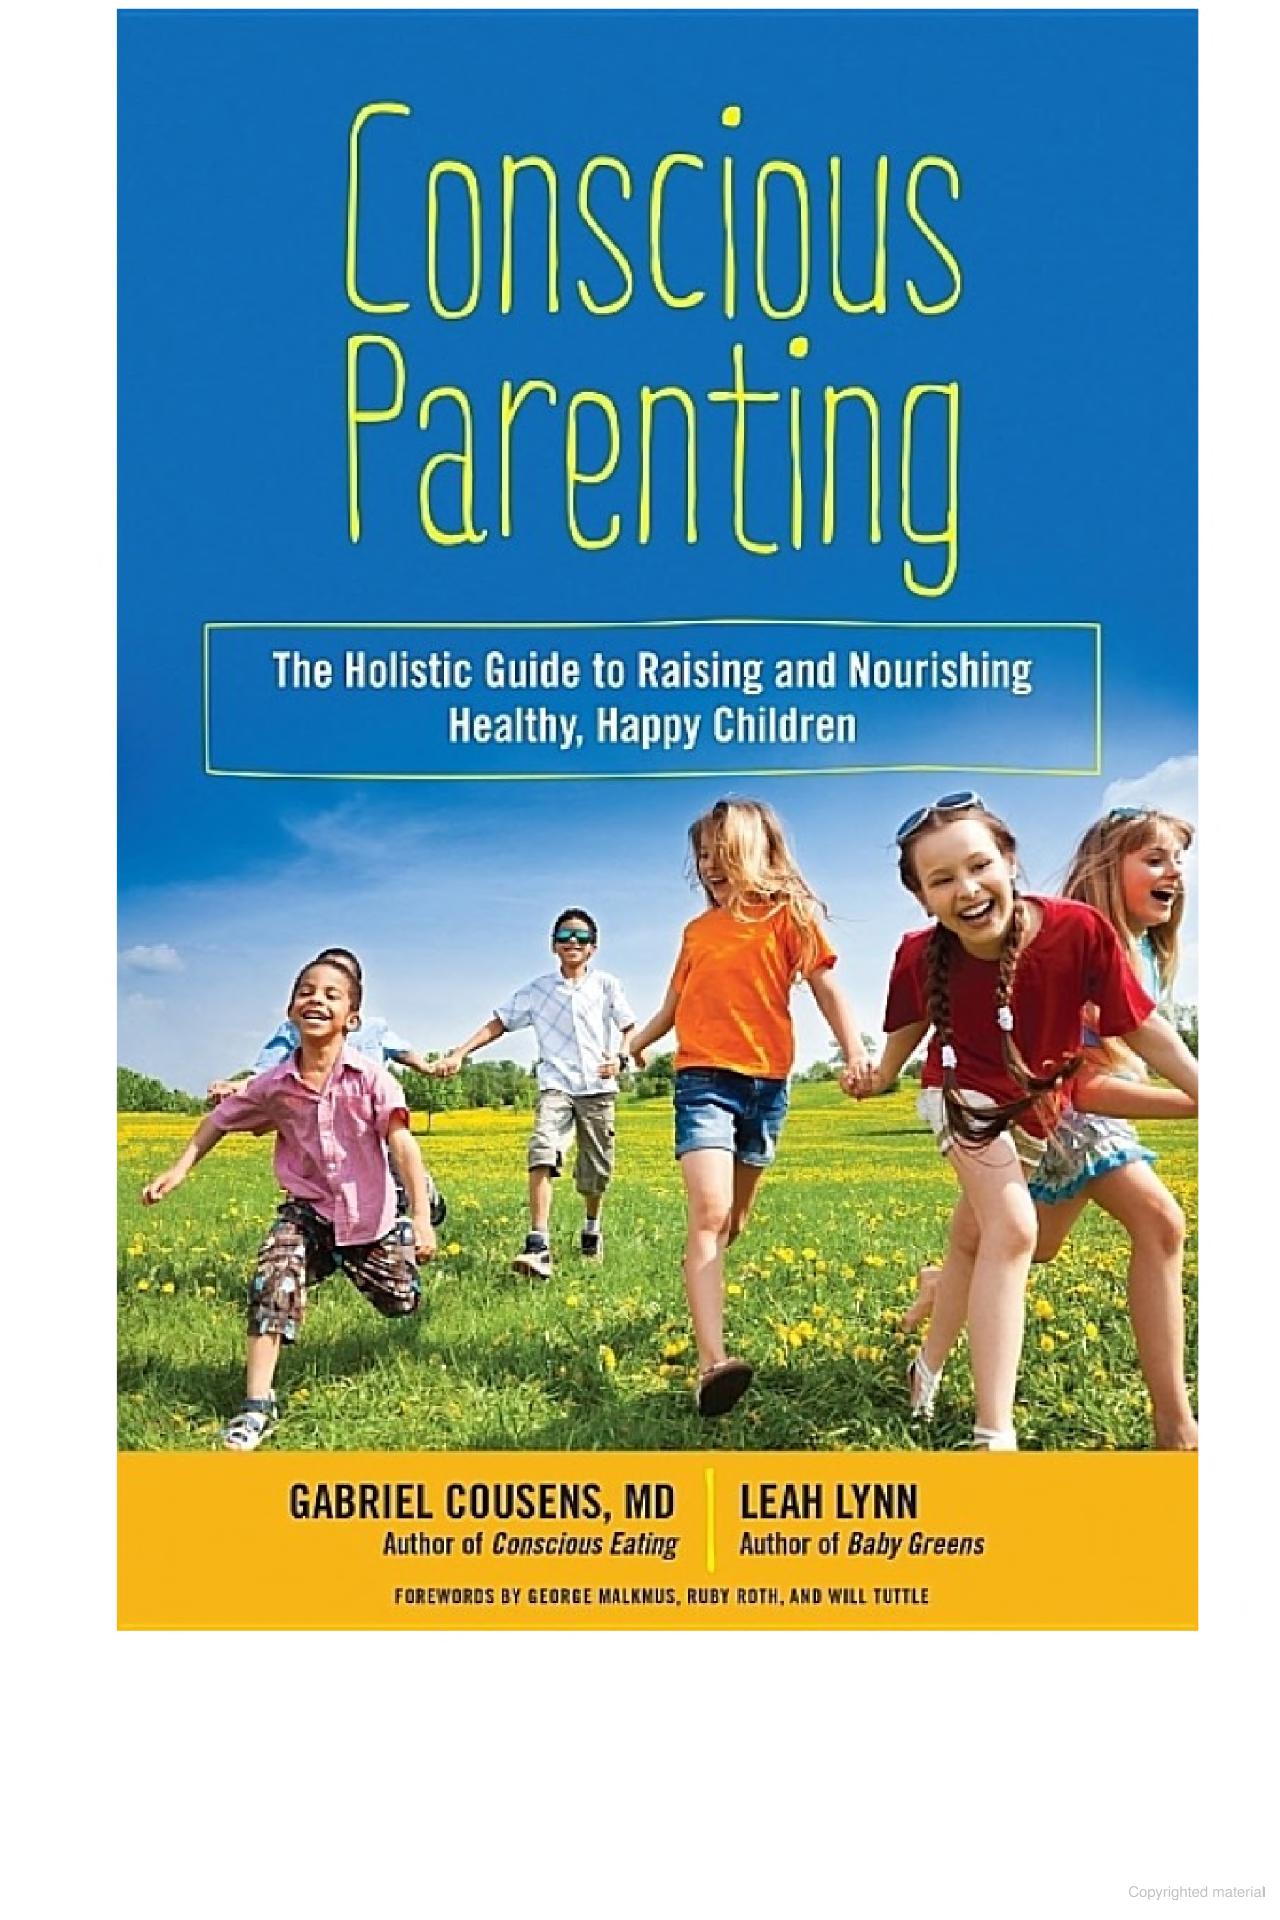 Conscious Parenting - The Holistic Guide to Raising and Nourishing Healthy, Happy Children